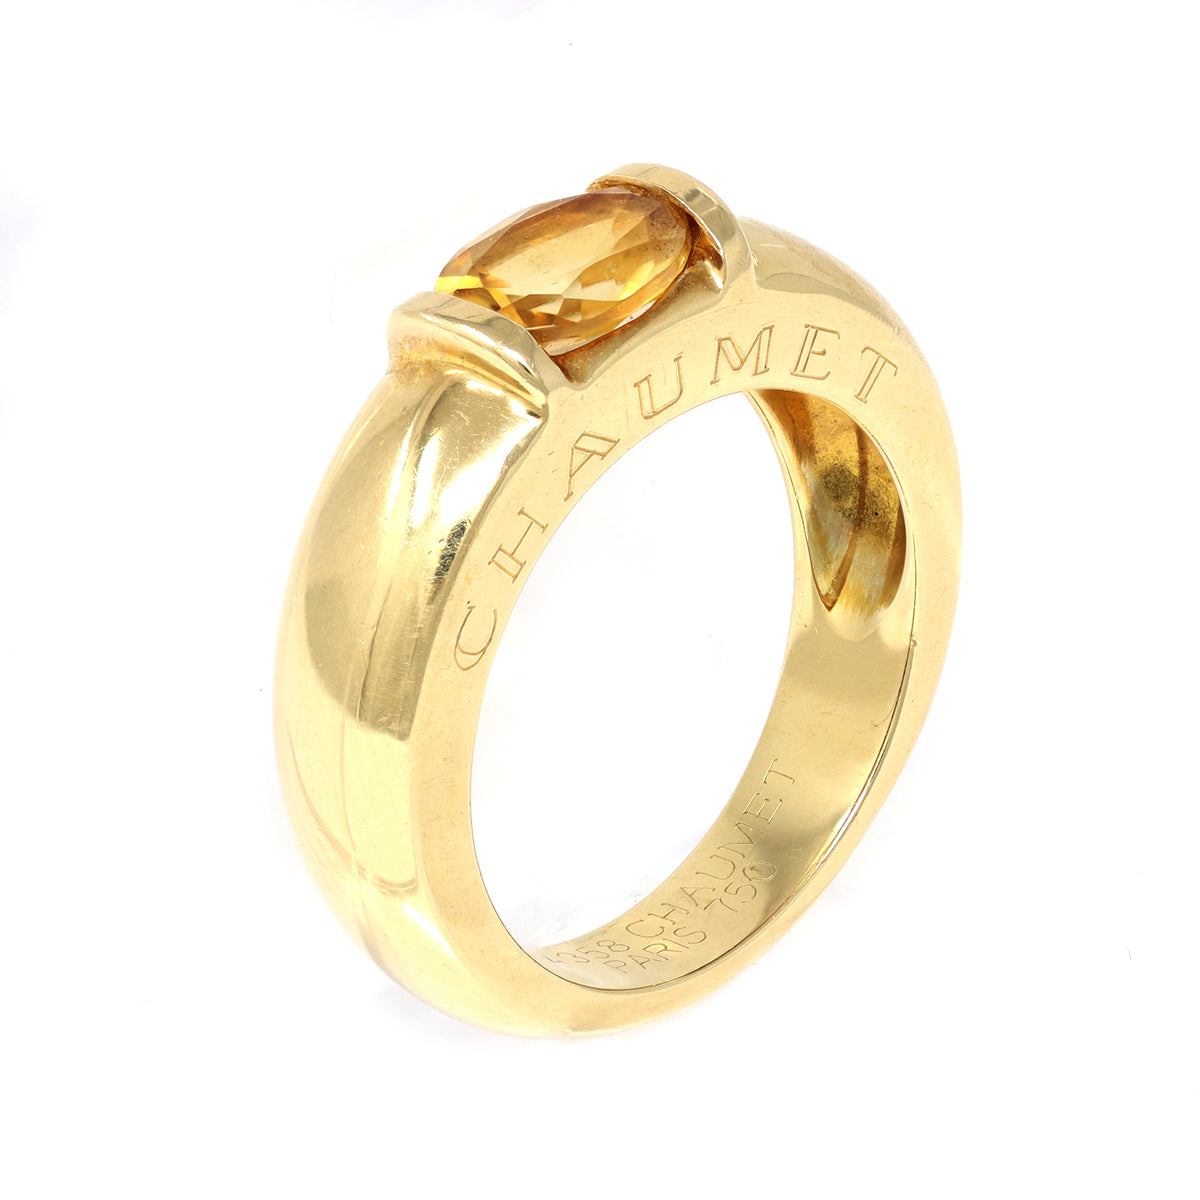 Signed Chaumet Paris Citrine Ring in 18k angle view